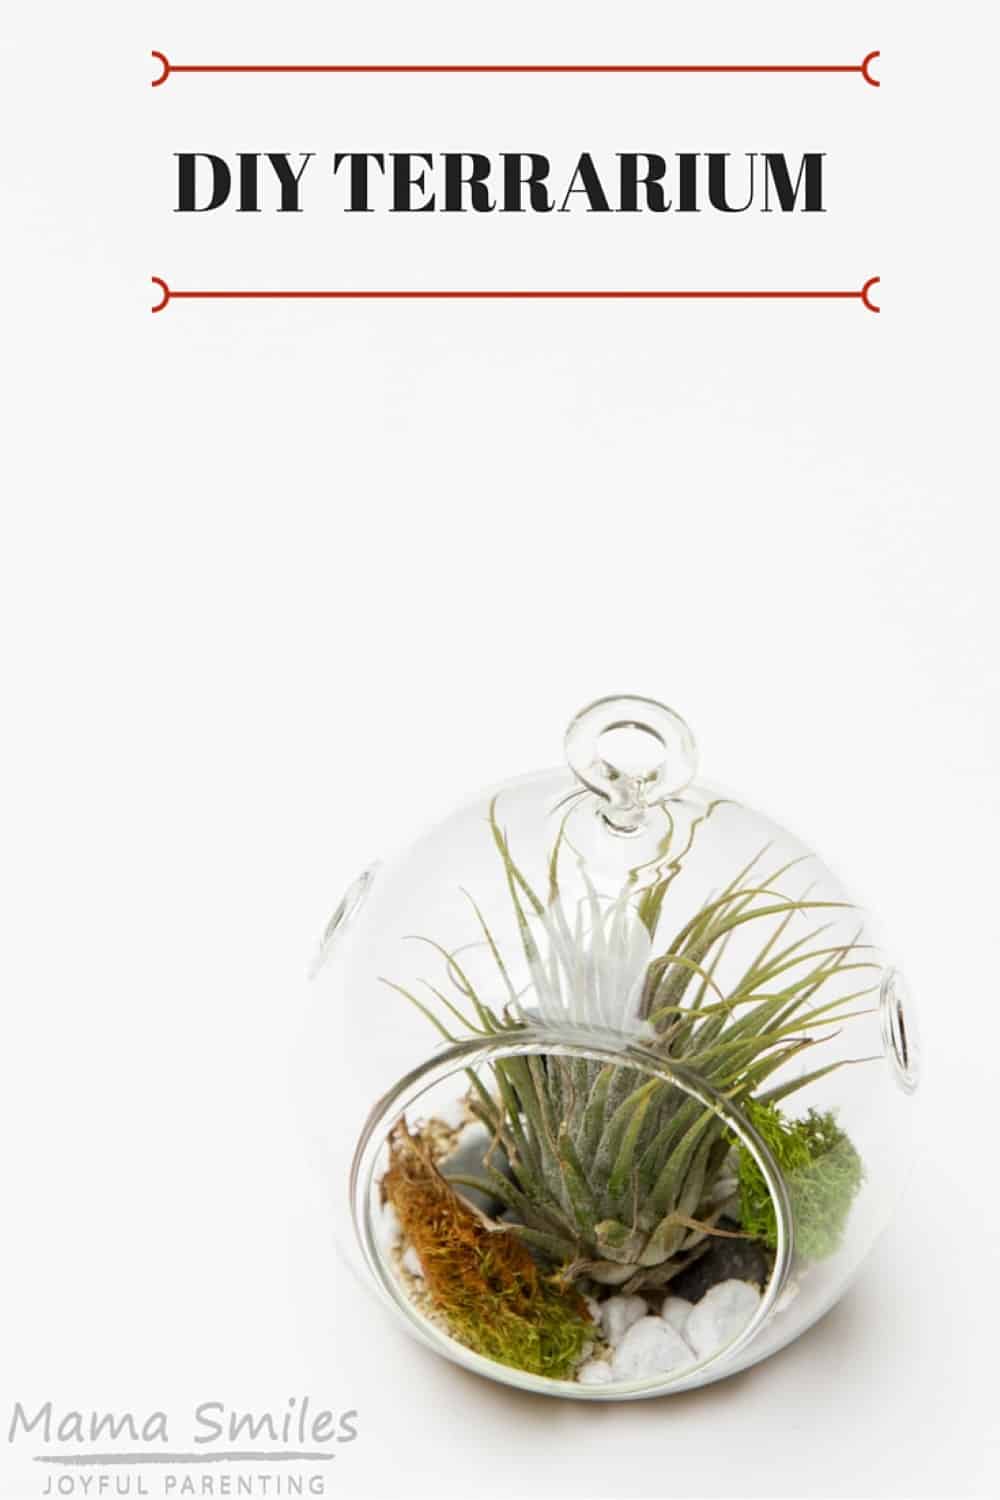 These DIY terrariums are gorgeous! They are wonderful as gifts or to keep as decoration in your own home.